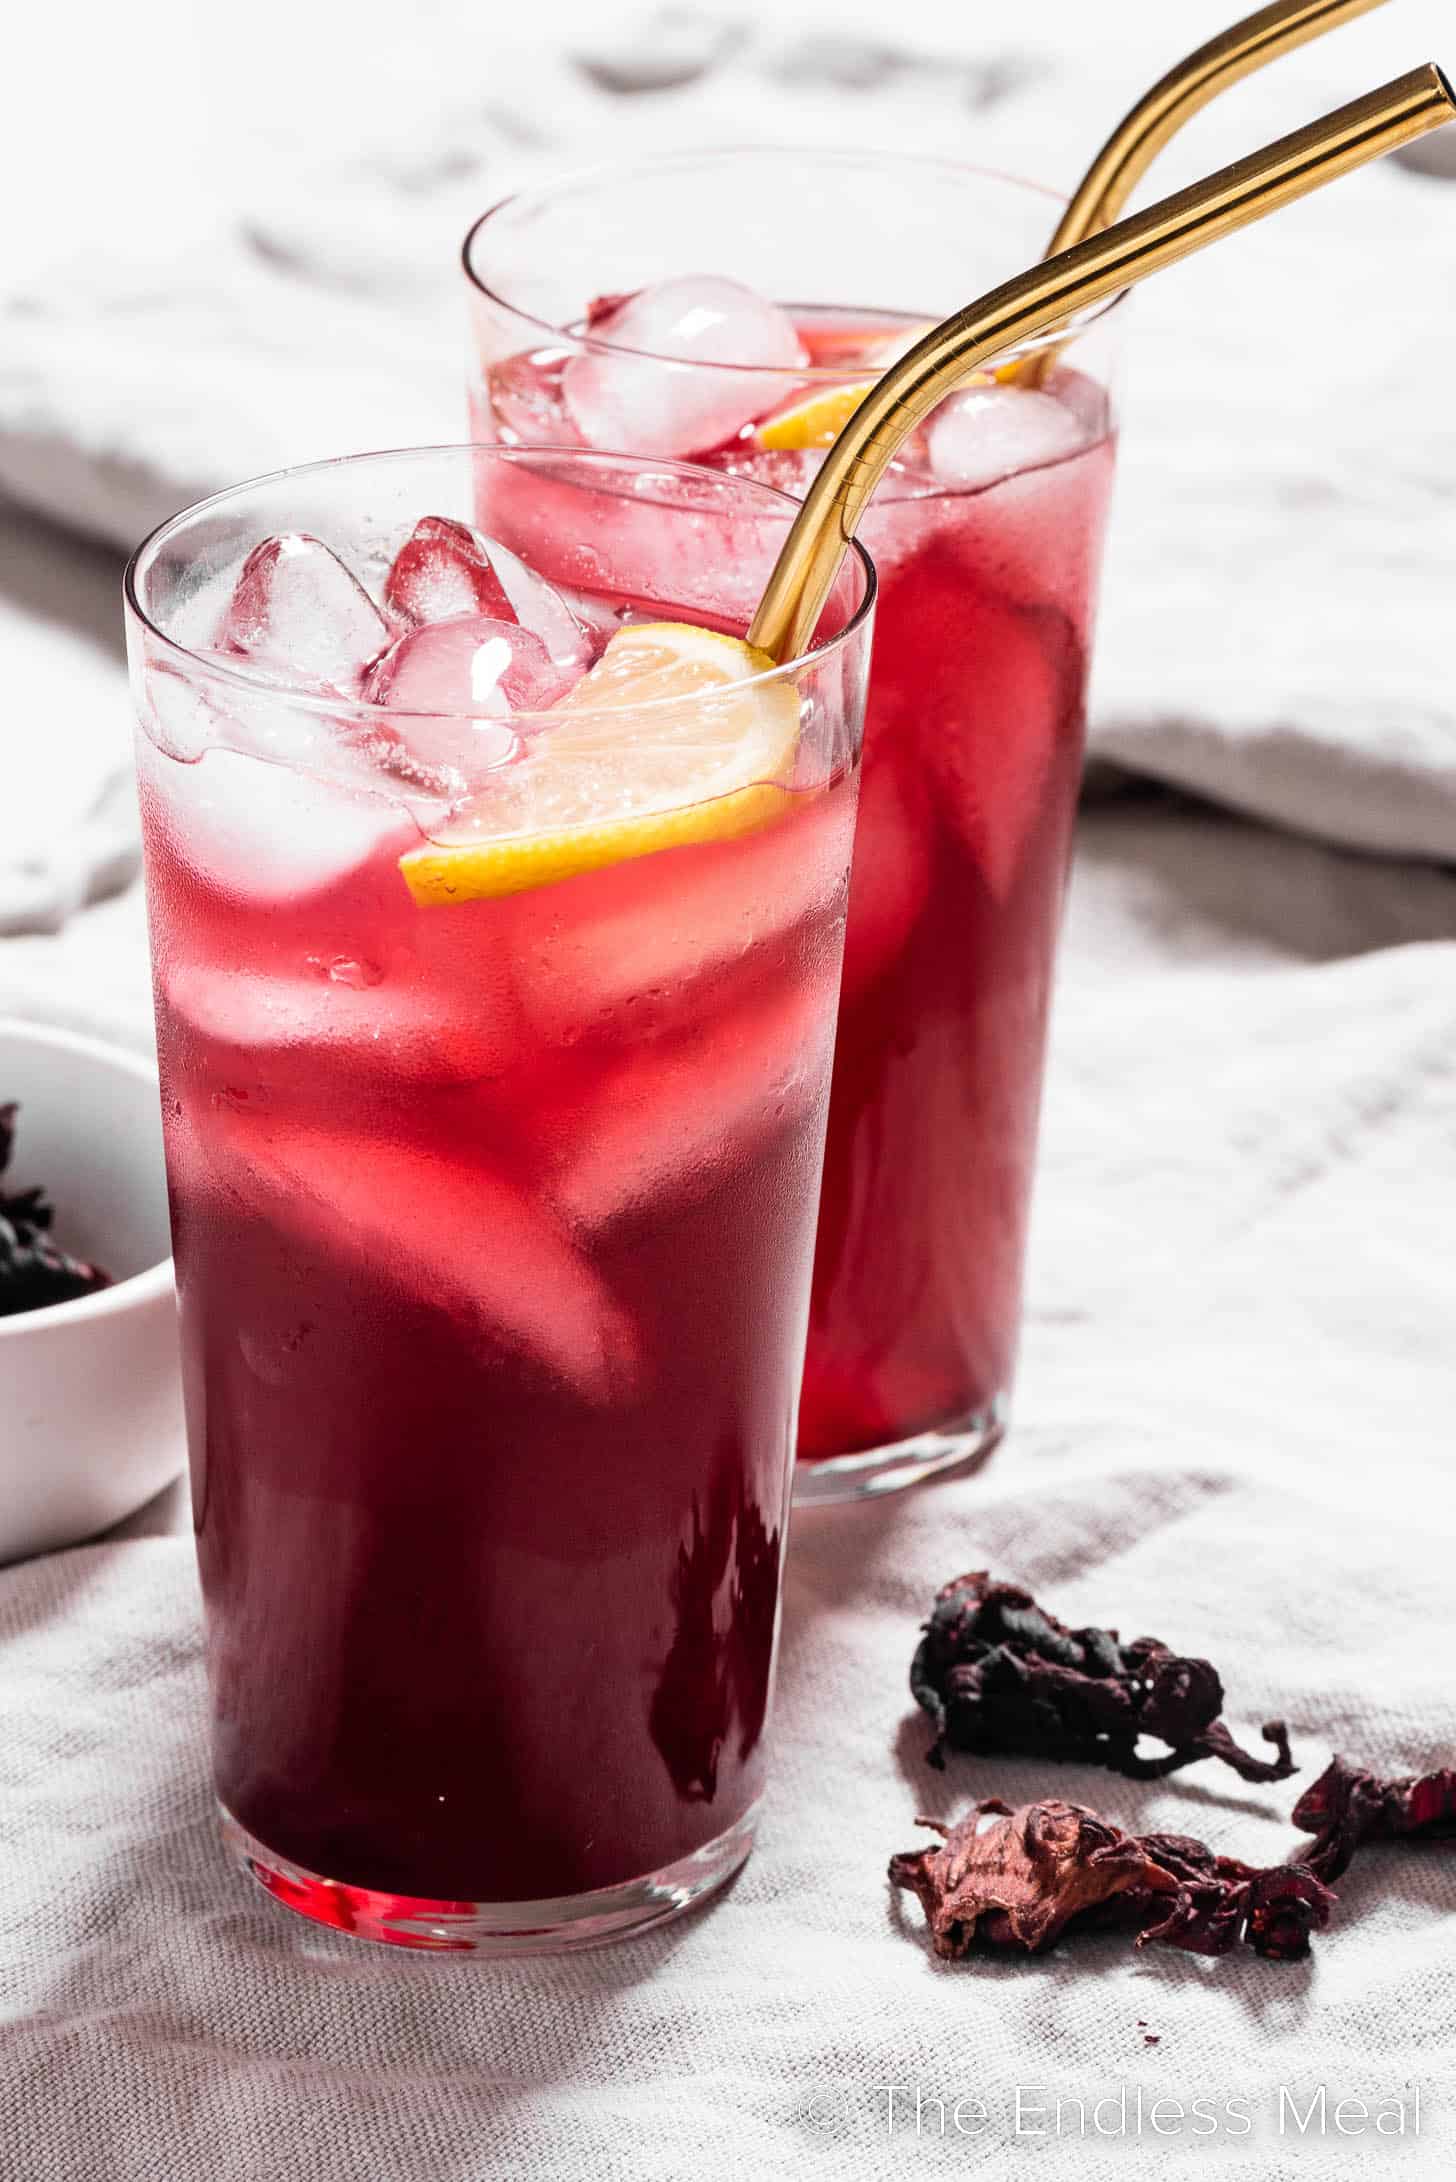 Two tall glasses of lemonade made with dried hibiscus flowers